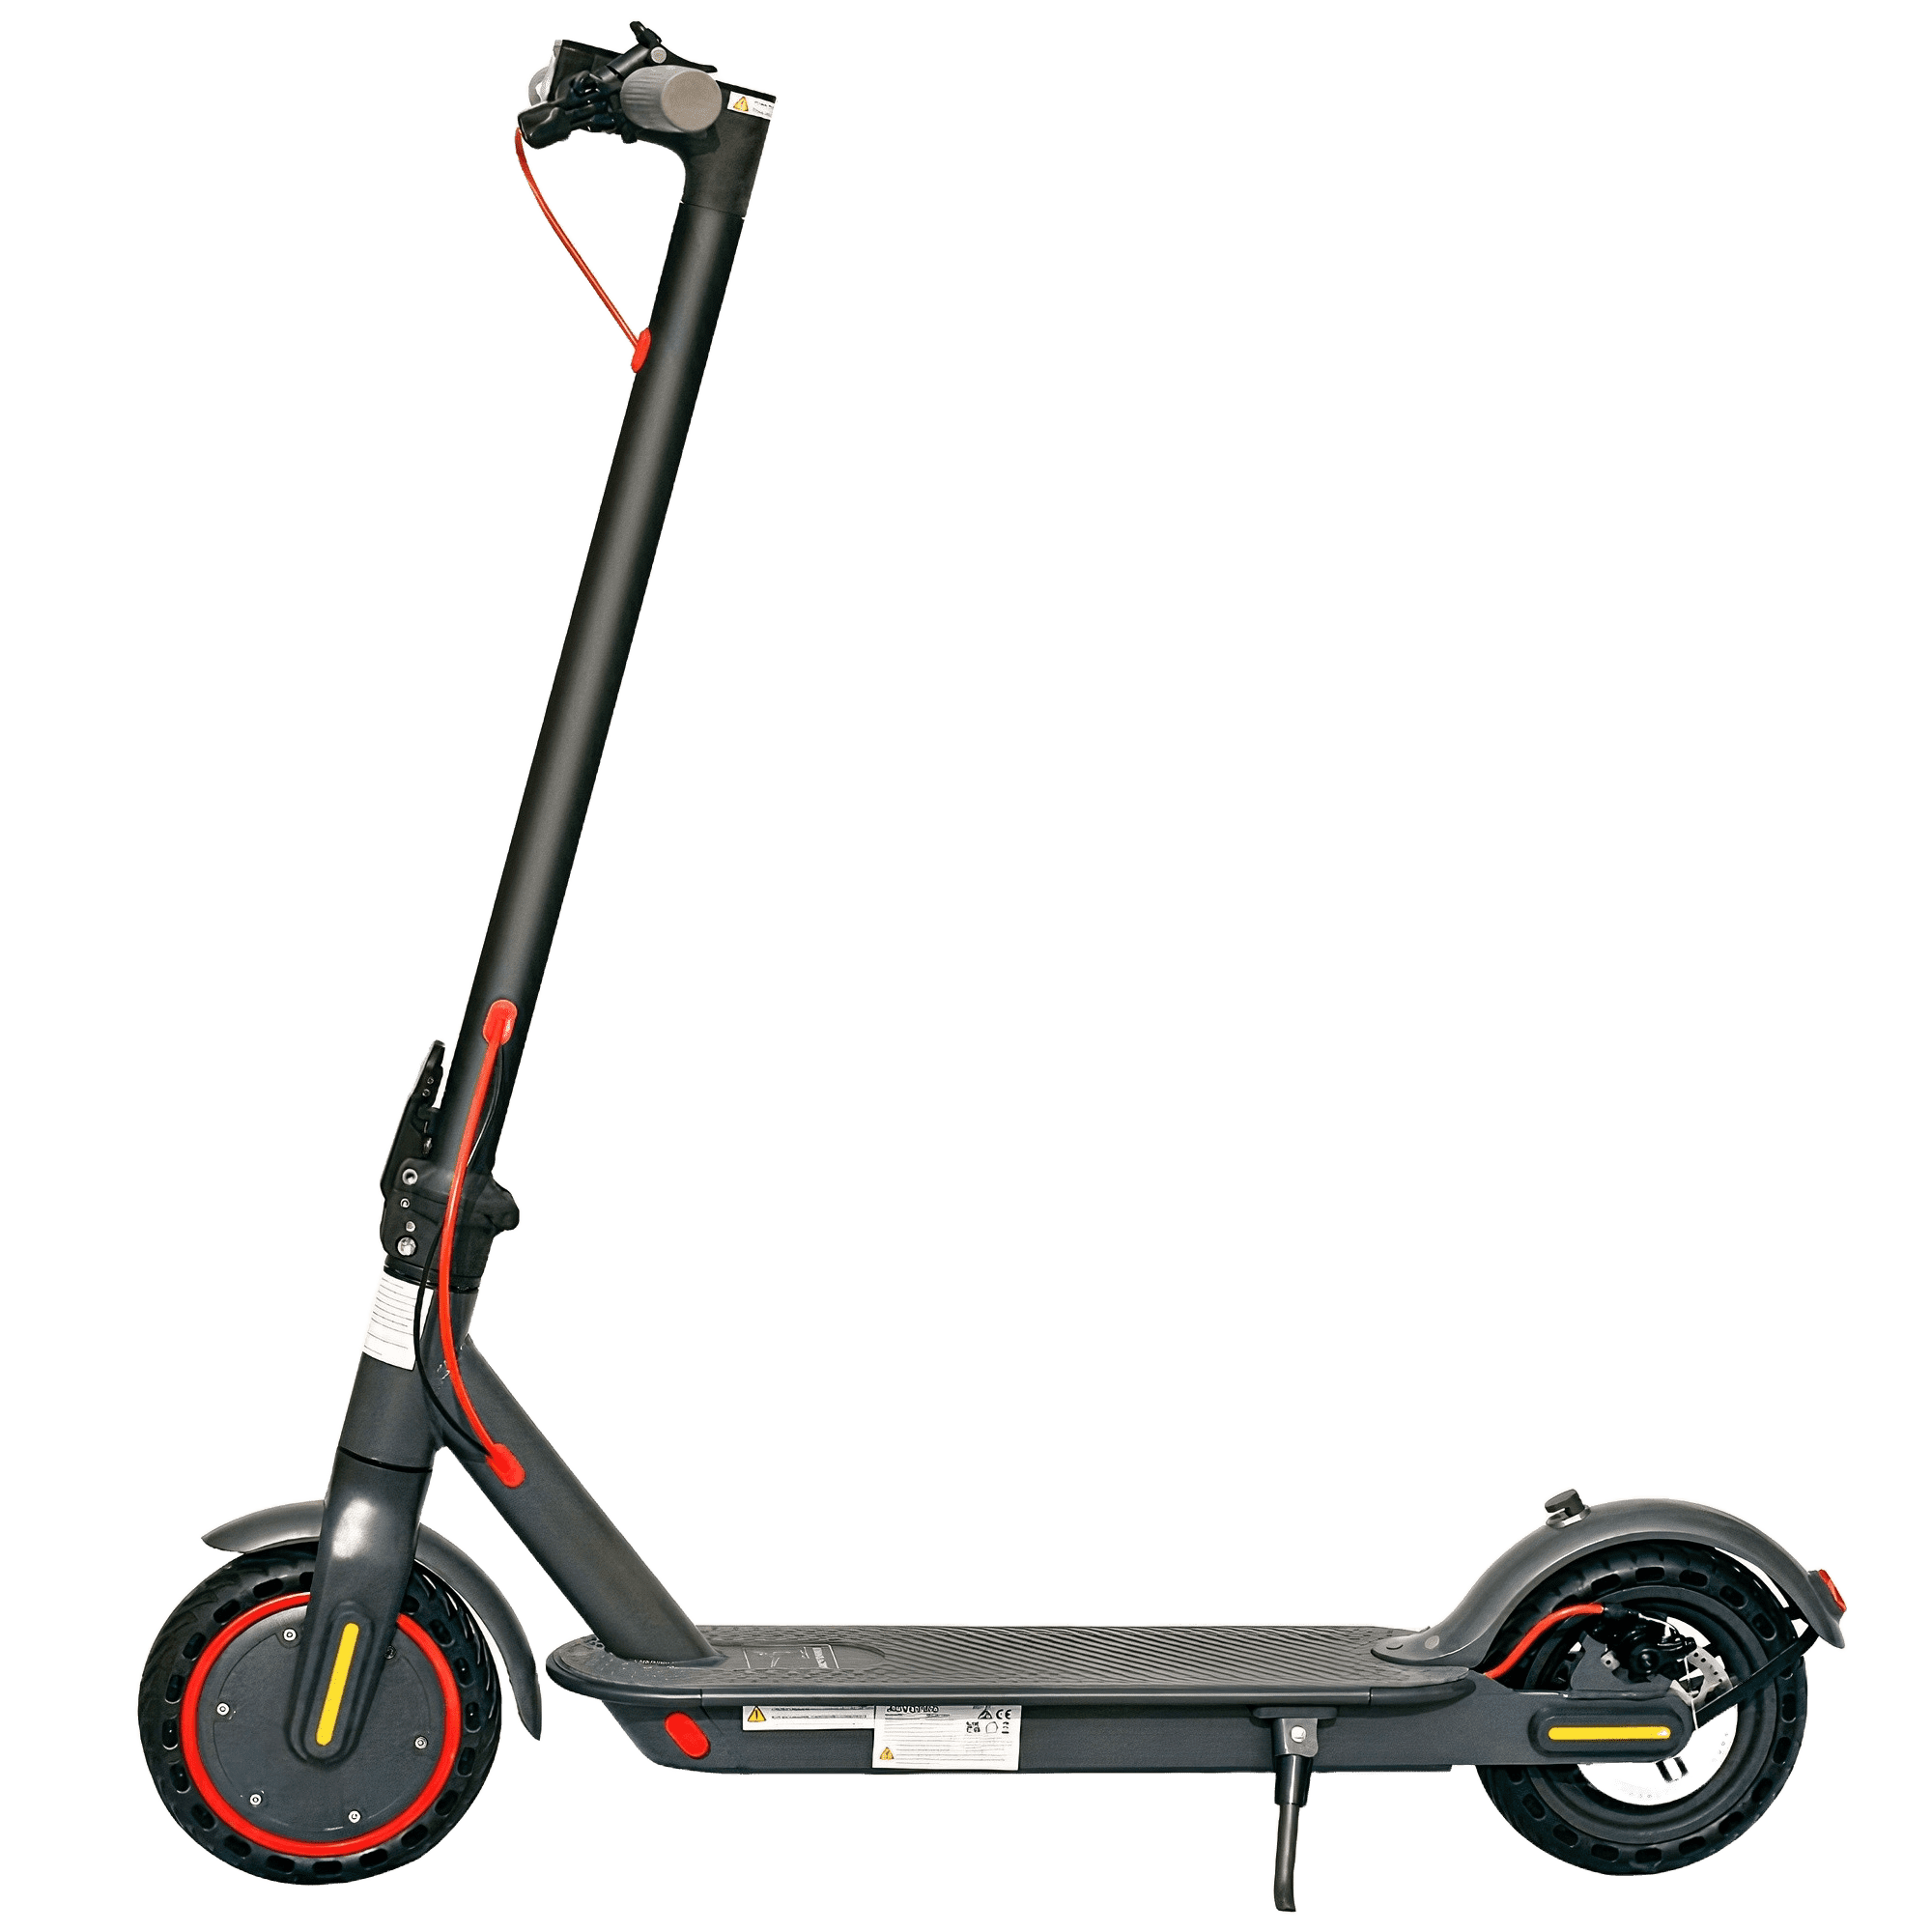 AOVOPRO ES80 FOLDABLE ELECTRIC SCOOTER - ScootiBoo